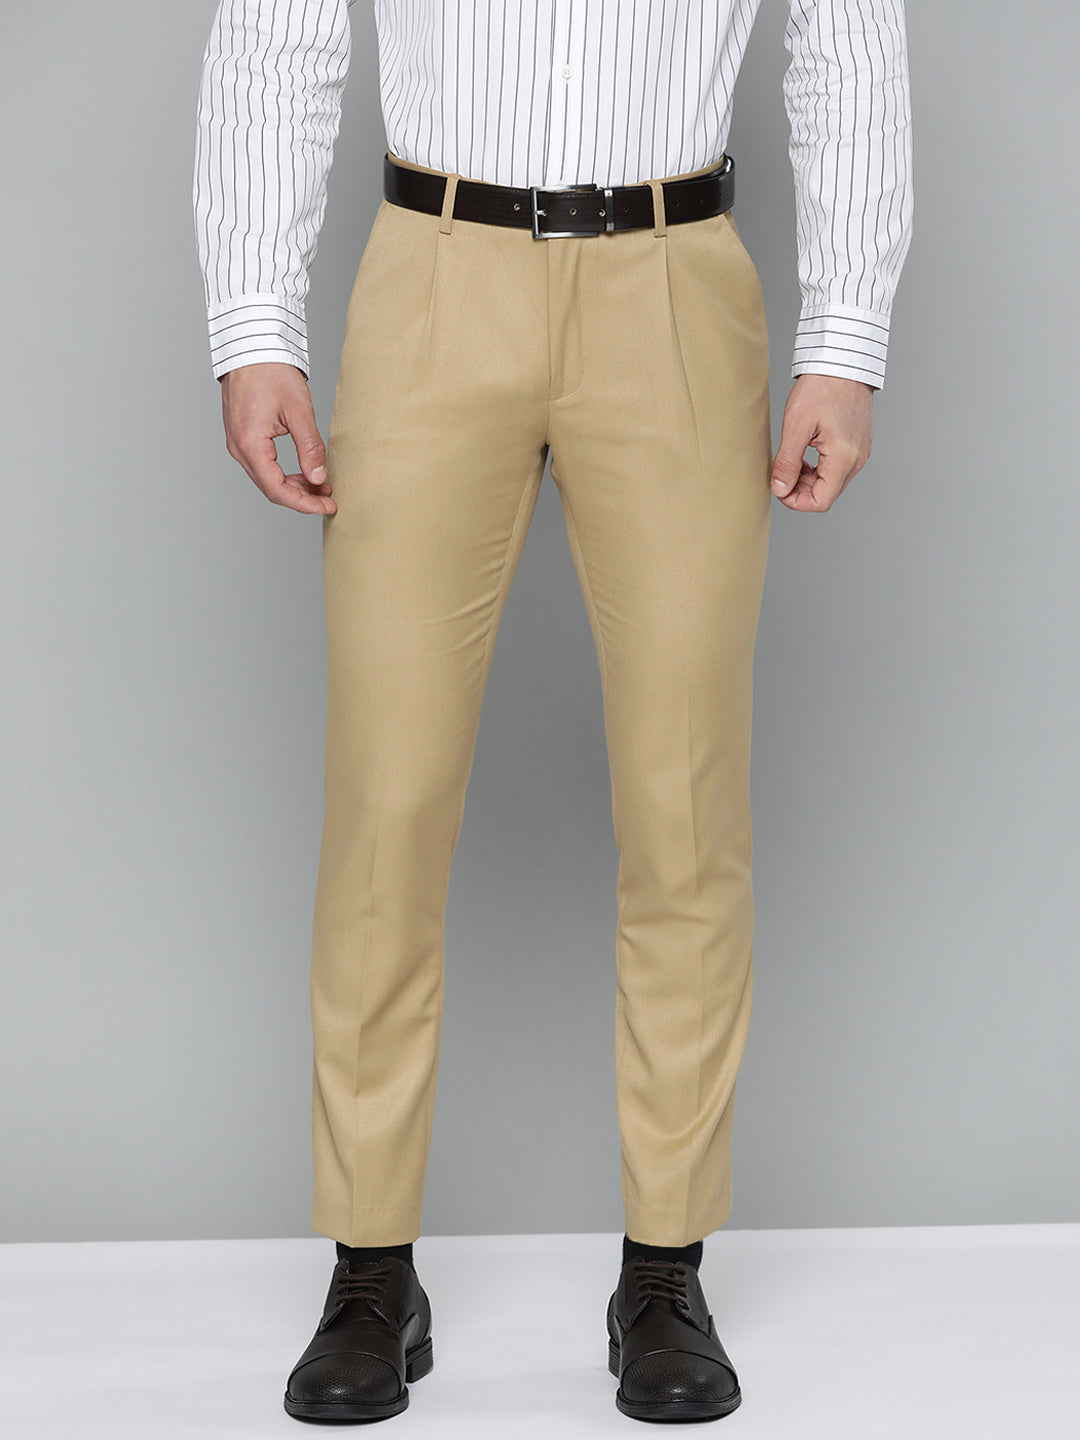 DENNISON Men Beige Smart Tapered Fit Pleated Trousers